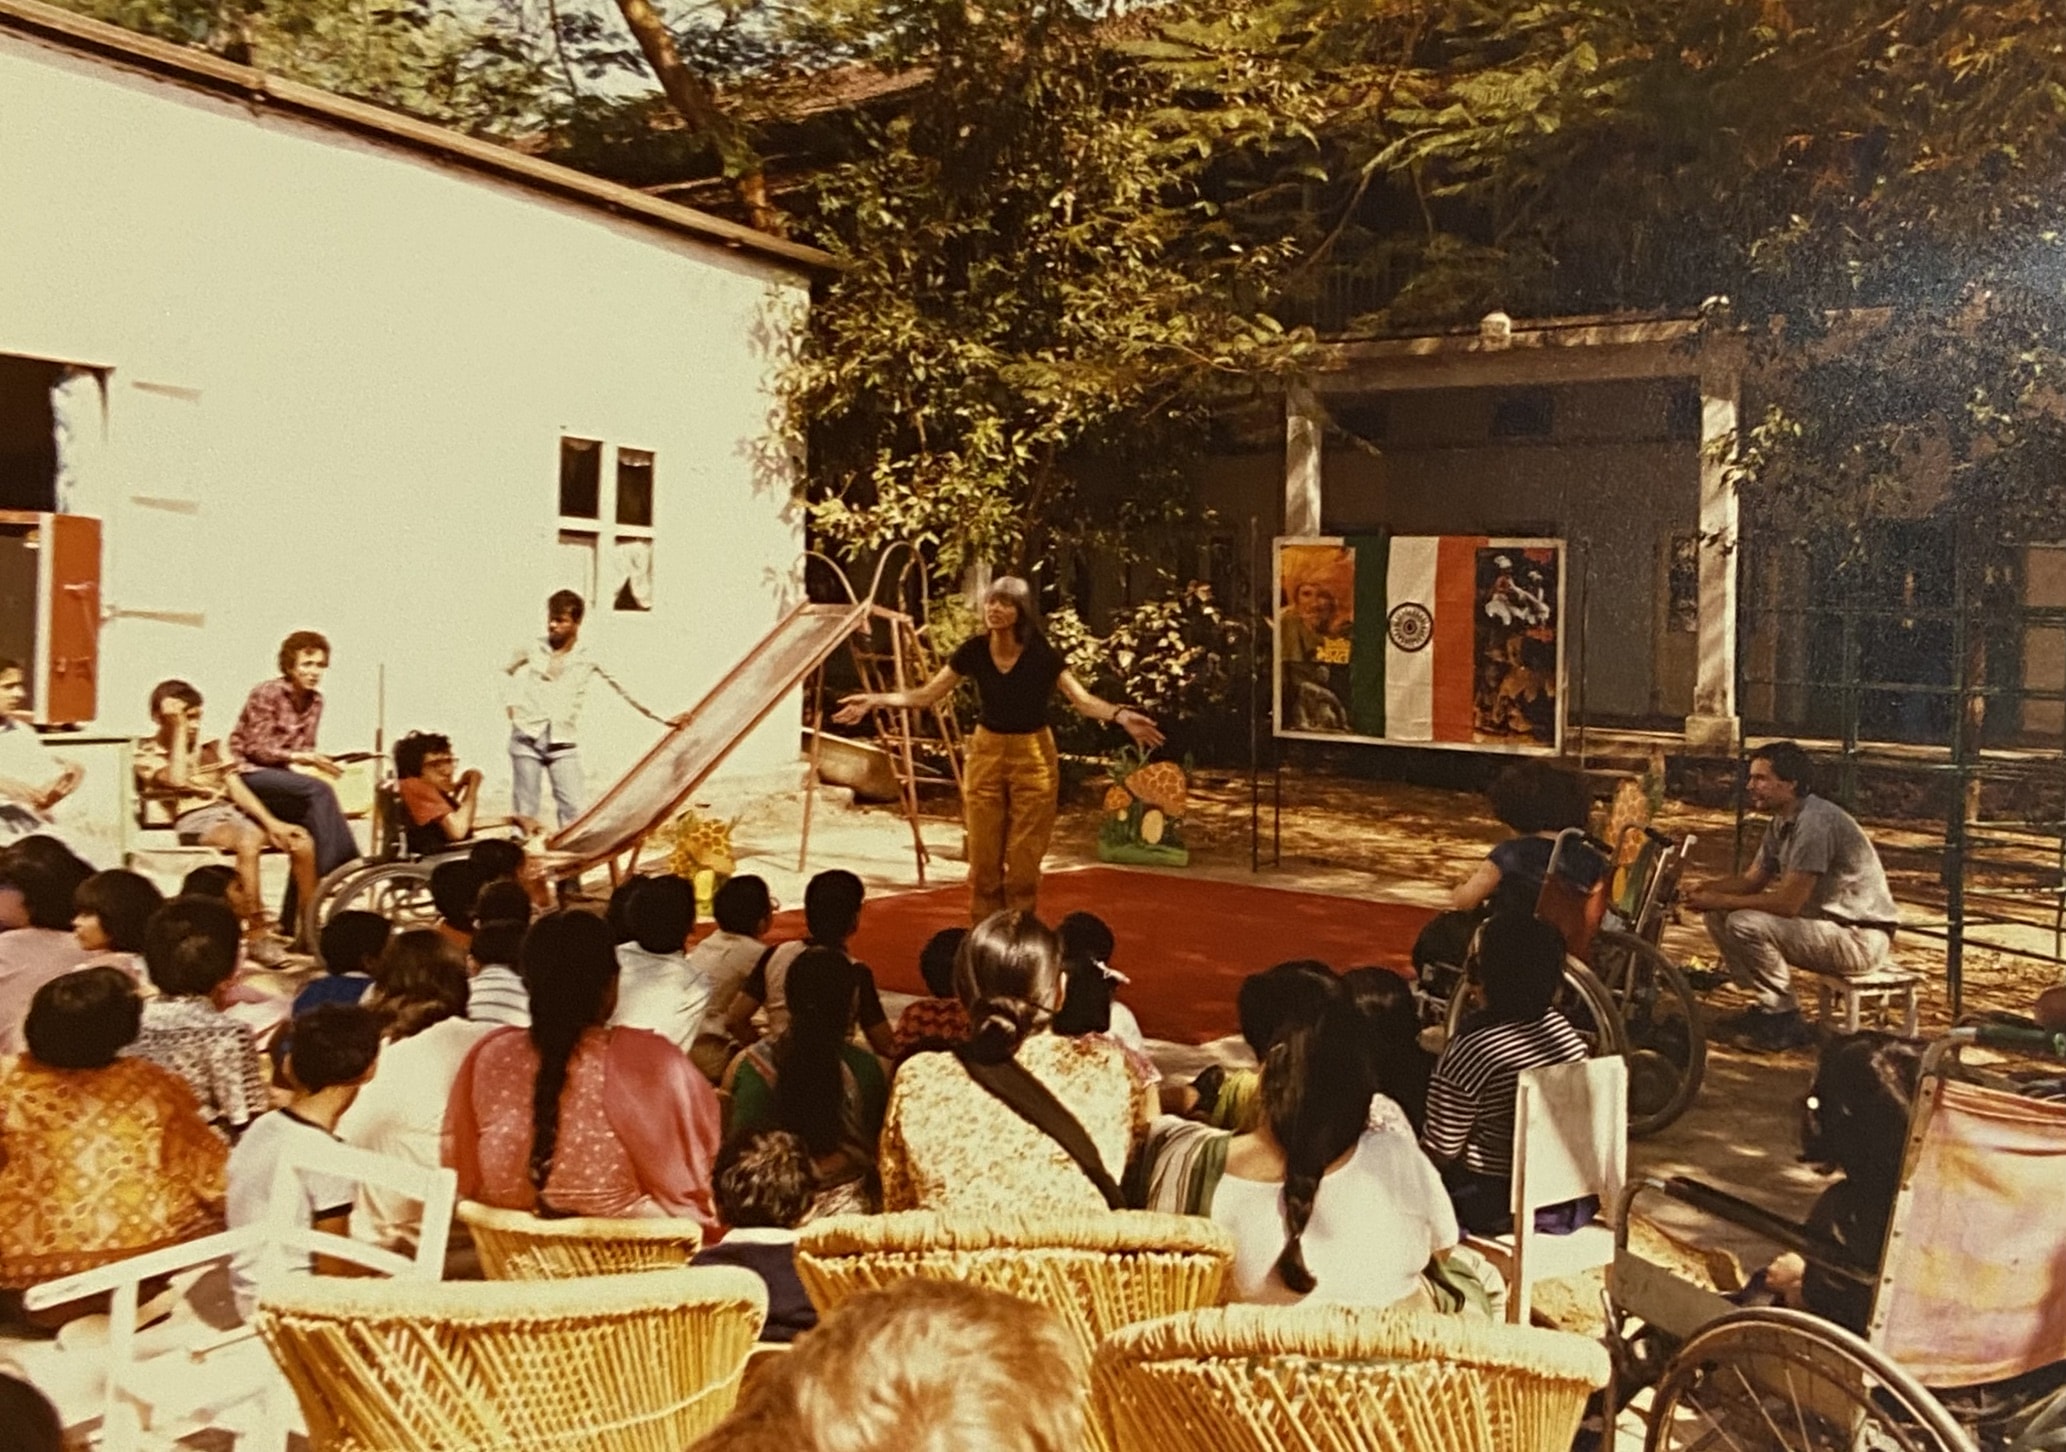 A gathering of people sat in a courtyard.